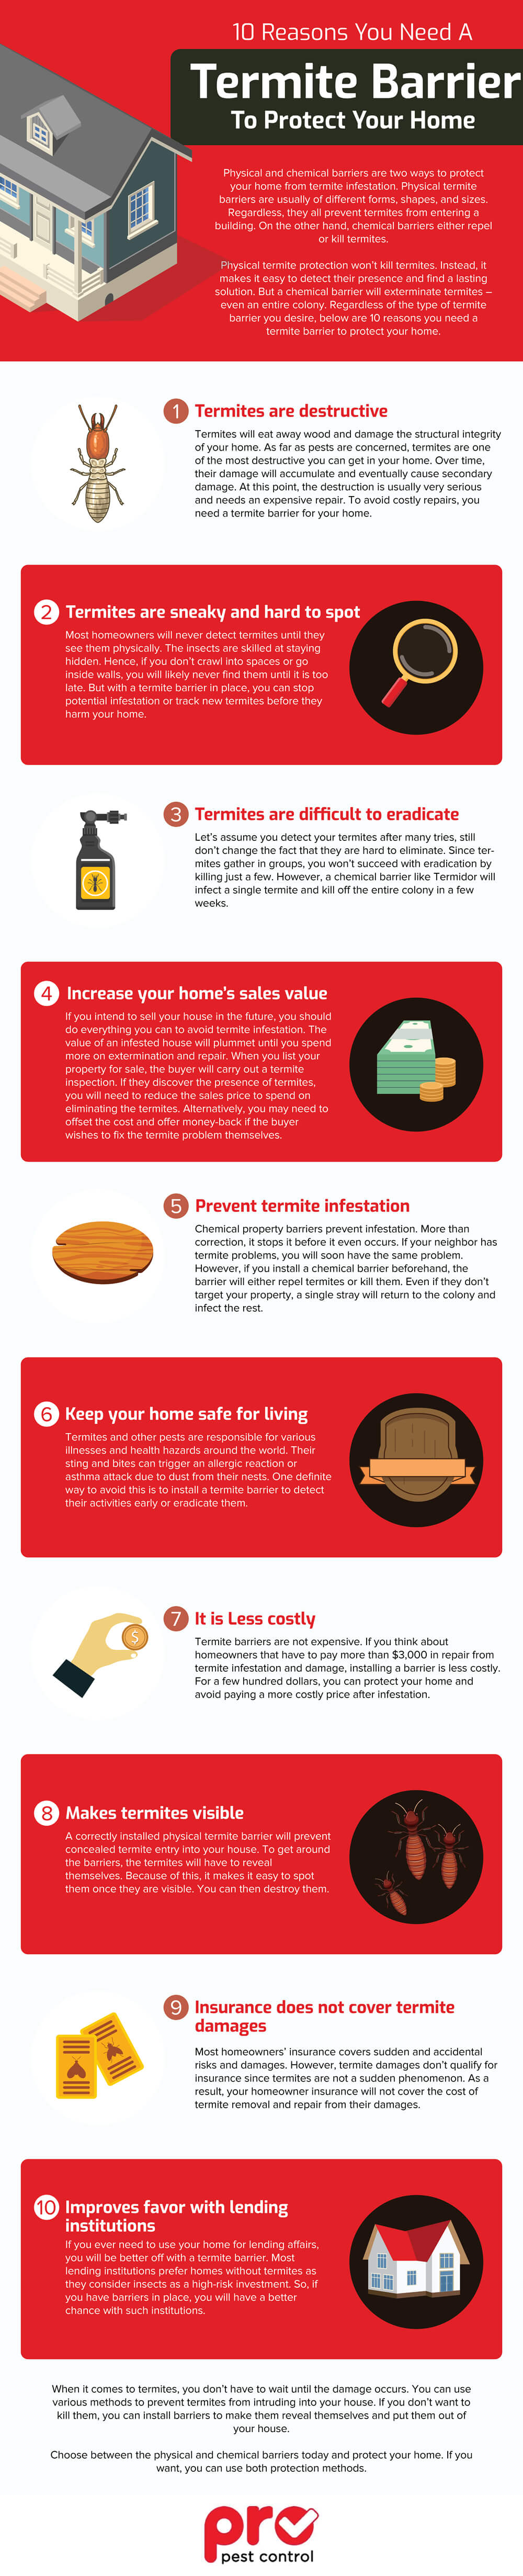 10-Reasons-You-Need-A-Termite-Barrier-To-Protect-Your-Home-infographic-plaza